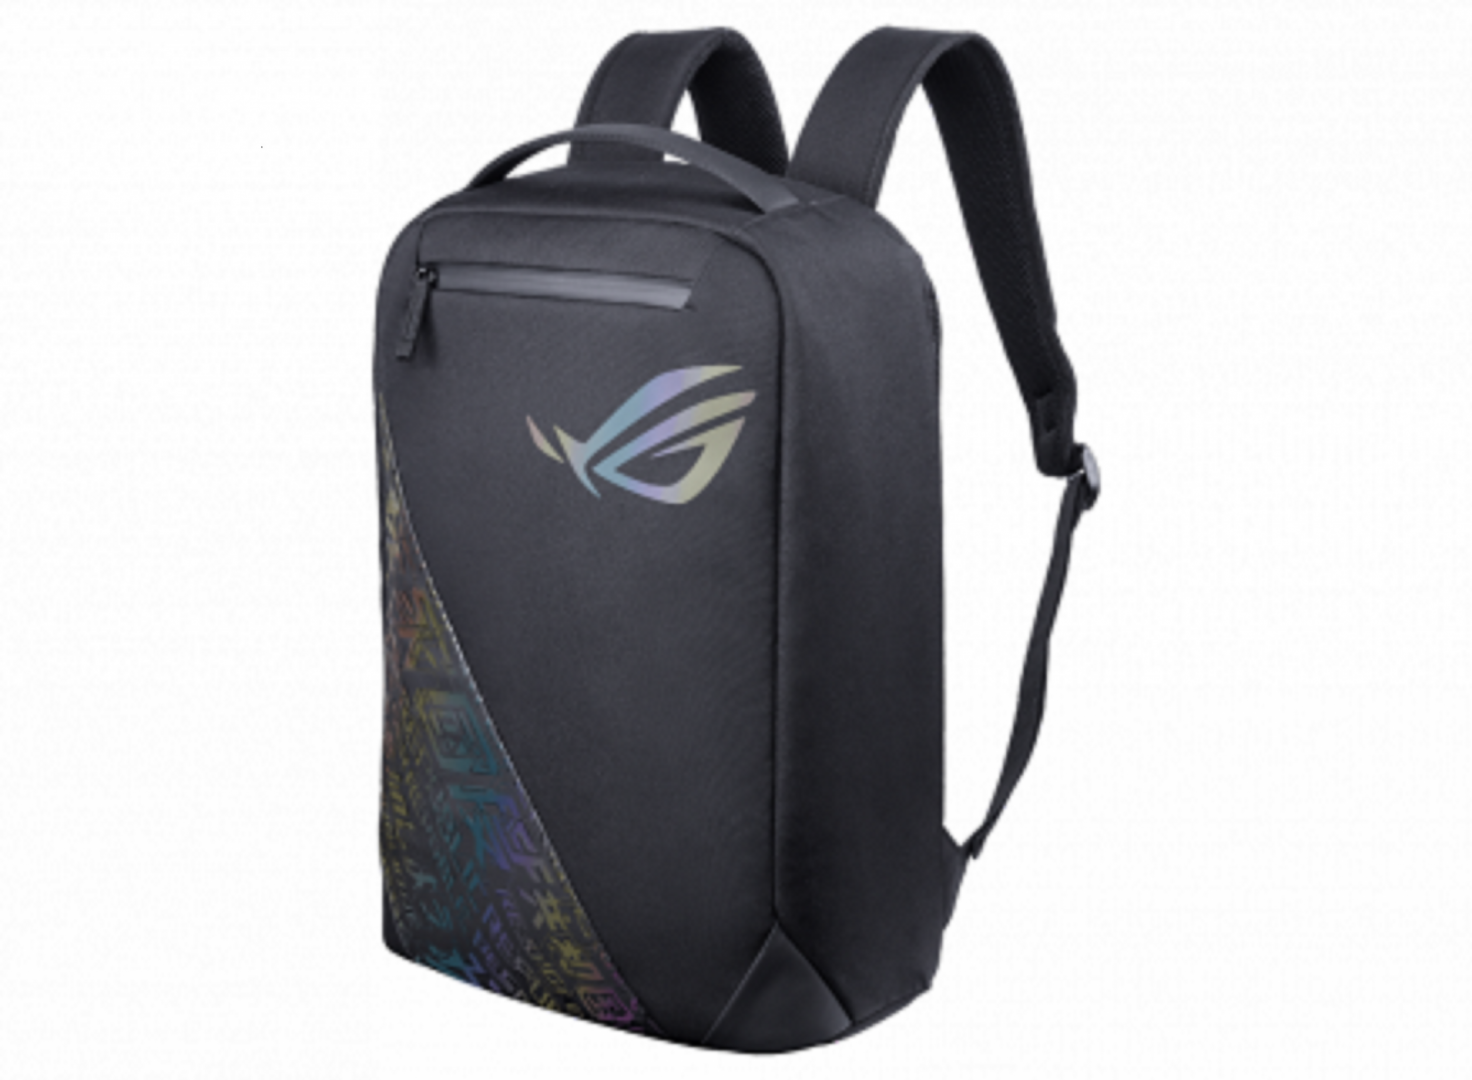 BP1501G ROG BACKPACK 15_17, Black, Holographic Edition,  Stylish, gaming-inspired design with the cyber-text pattern and ROG Logo, Quick- access exterior pocket for your essential accessories, Generous 18L interior for easy transport of an up to 17’’ notebook, Dimensions: 332* 460*153mm (L x H x